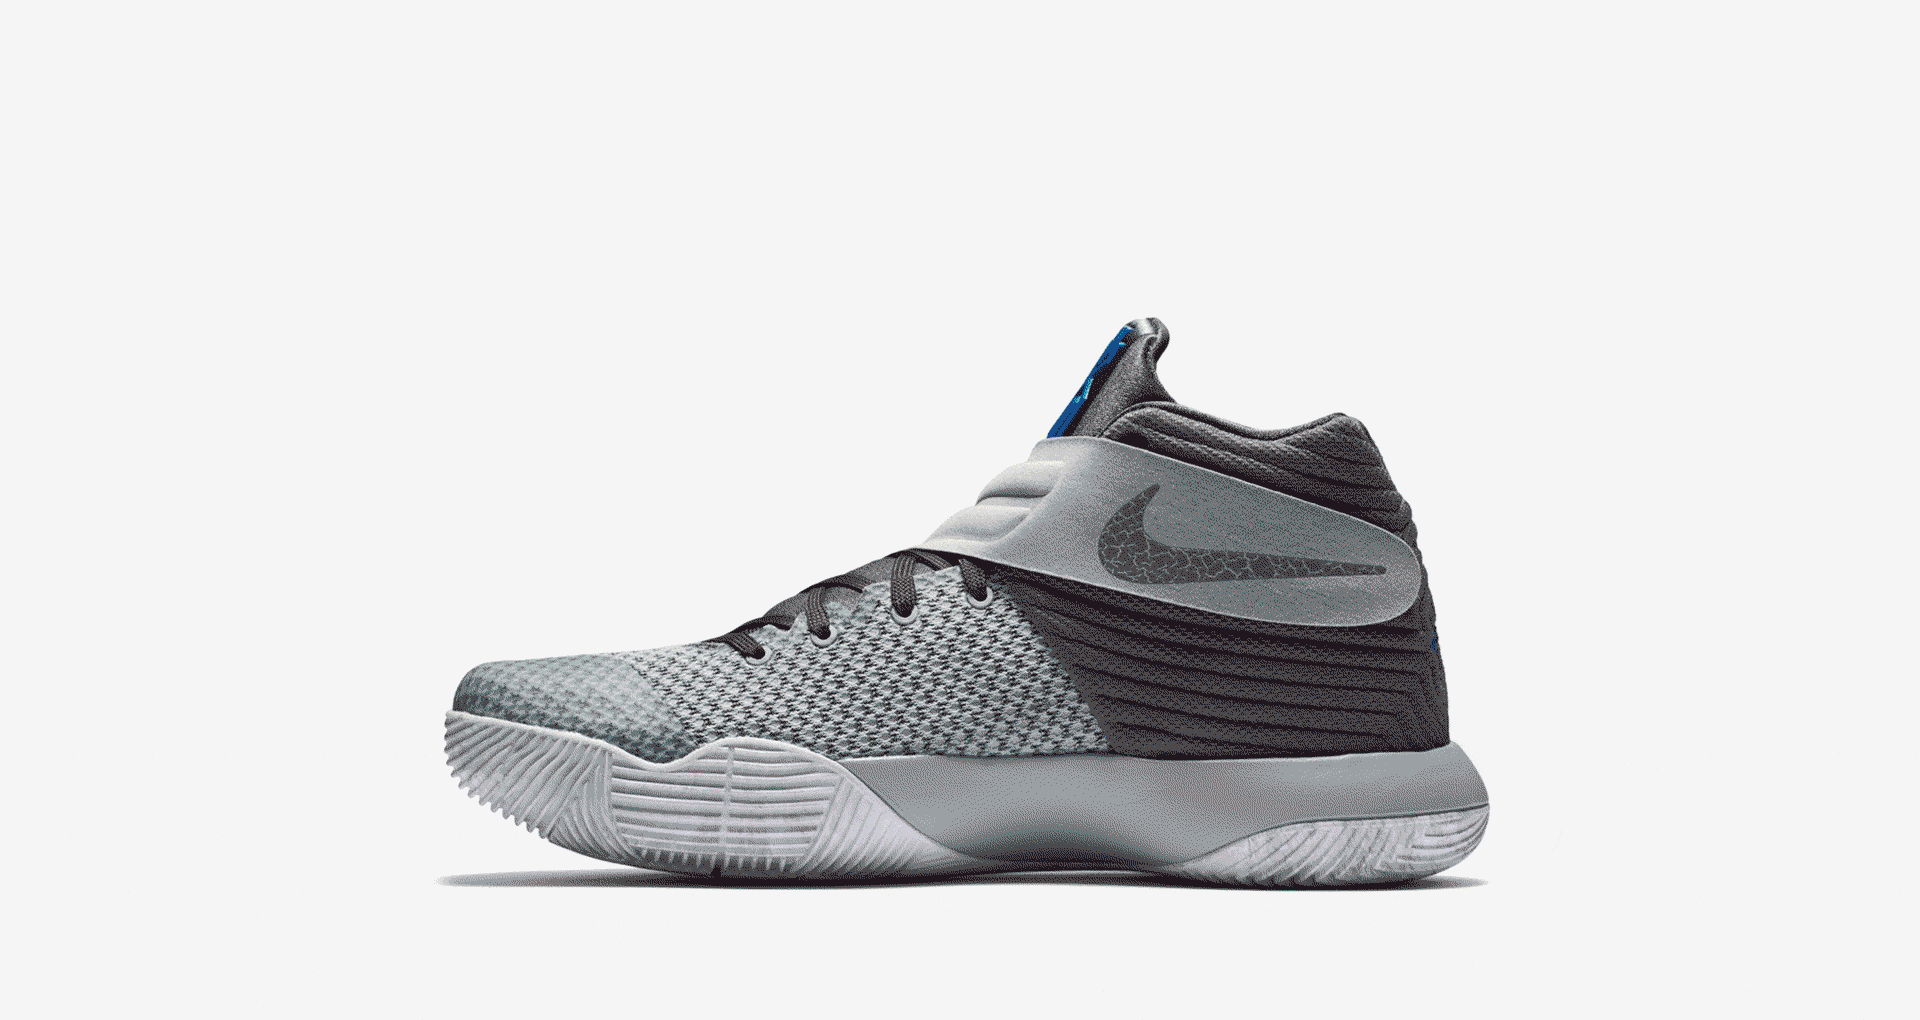 Behind the Design of the Nike Kyrie 2 